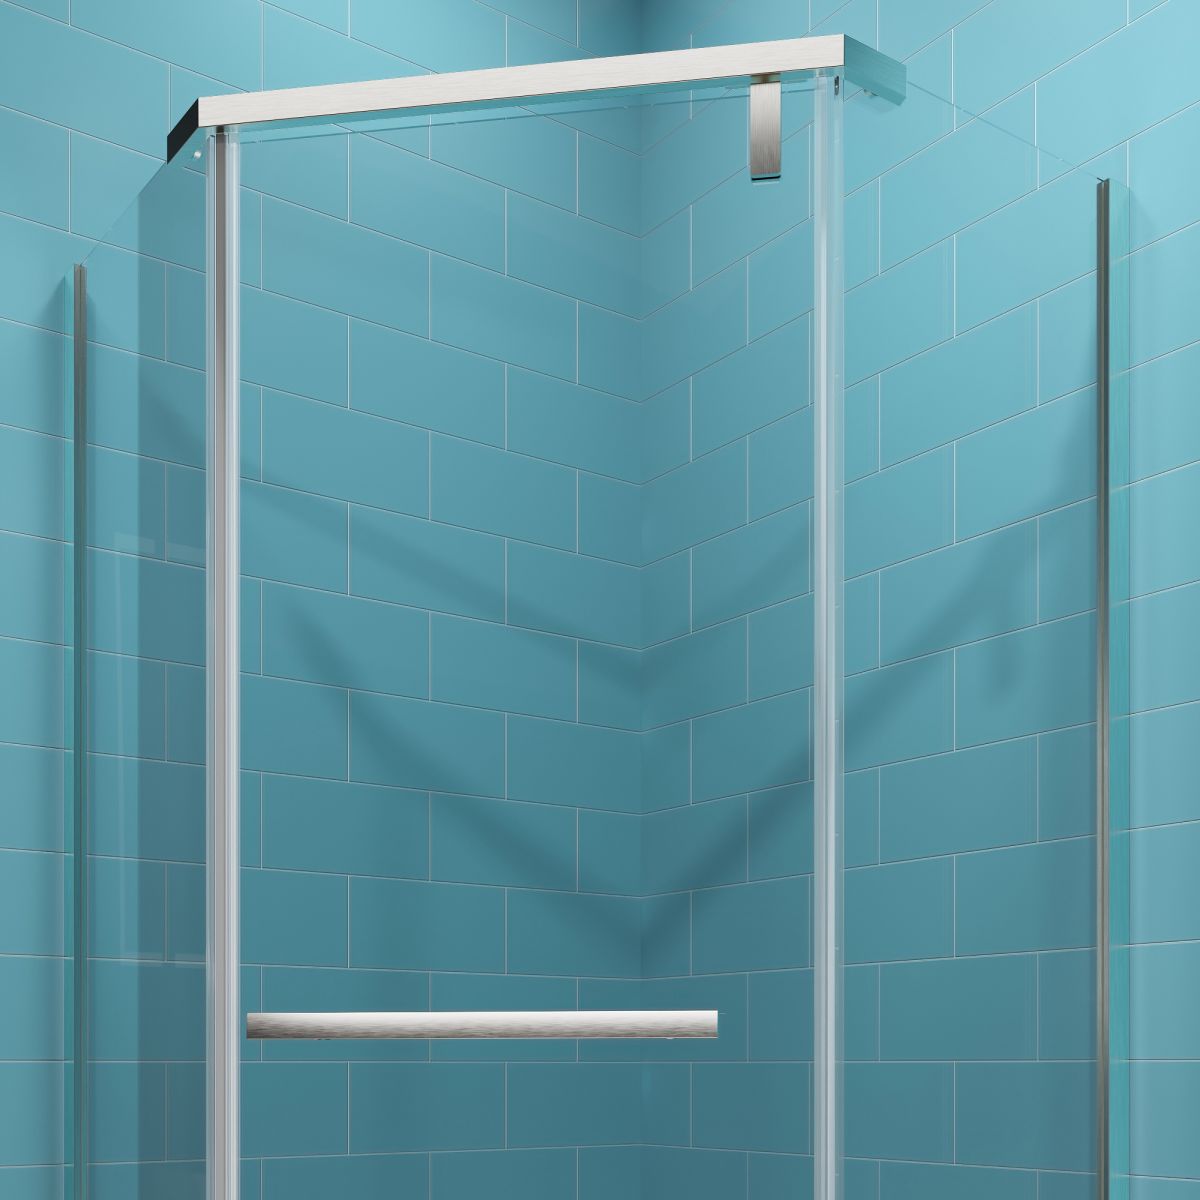 Prism Neo-Angle Frameless Shower Door 38 in. W x 72 in. H,Corner Shower Enclosure with 6mm Clear Glass,Pivot Shower Doors,Brushed Nickel